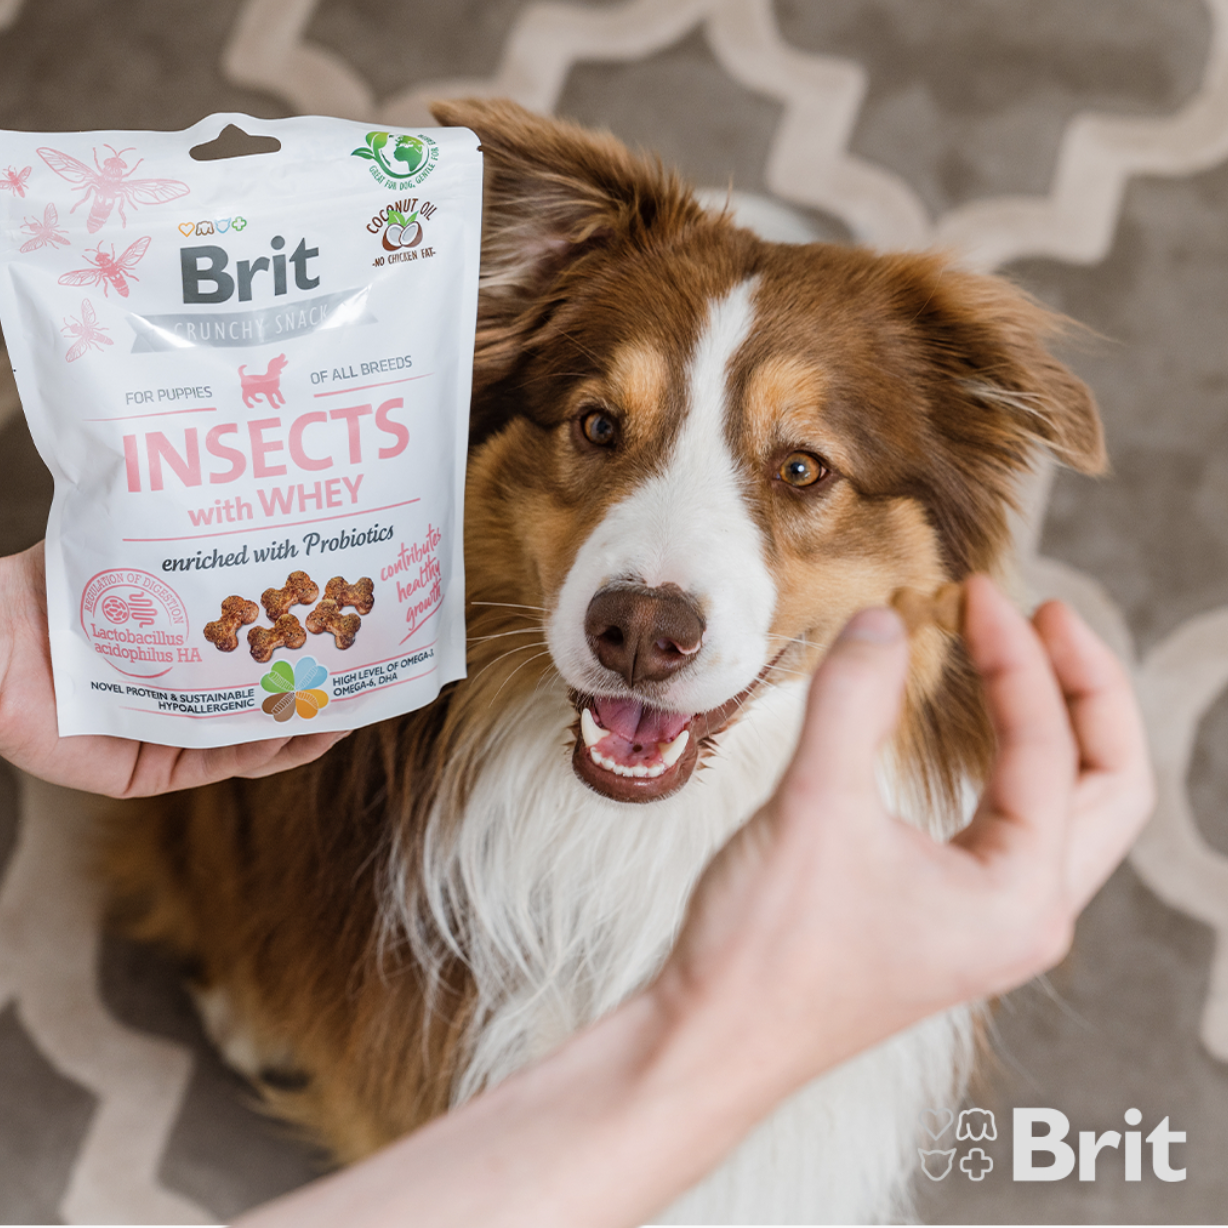 Dog eating brit care insects